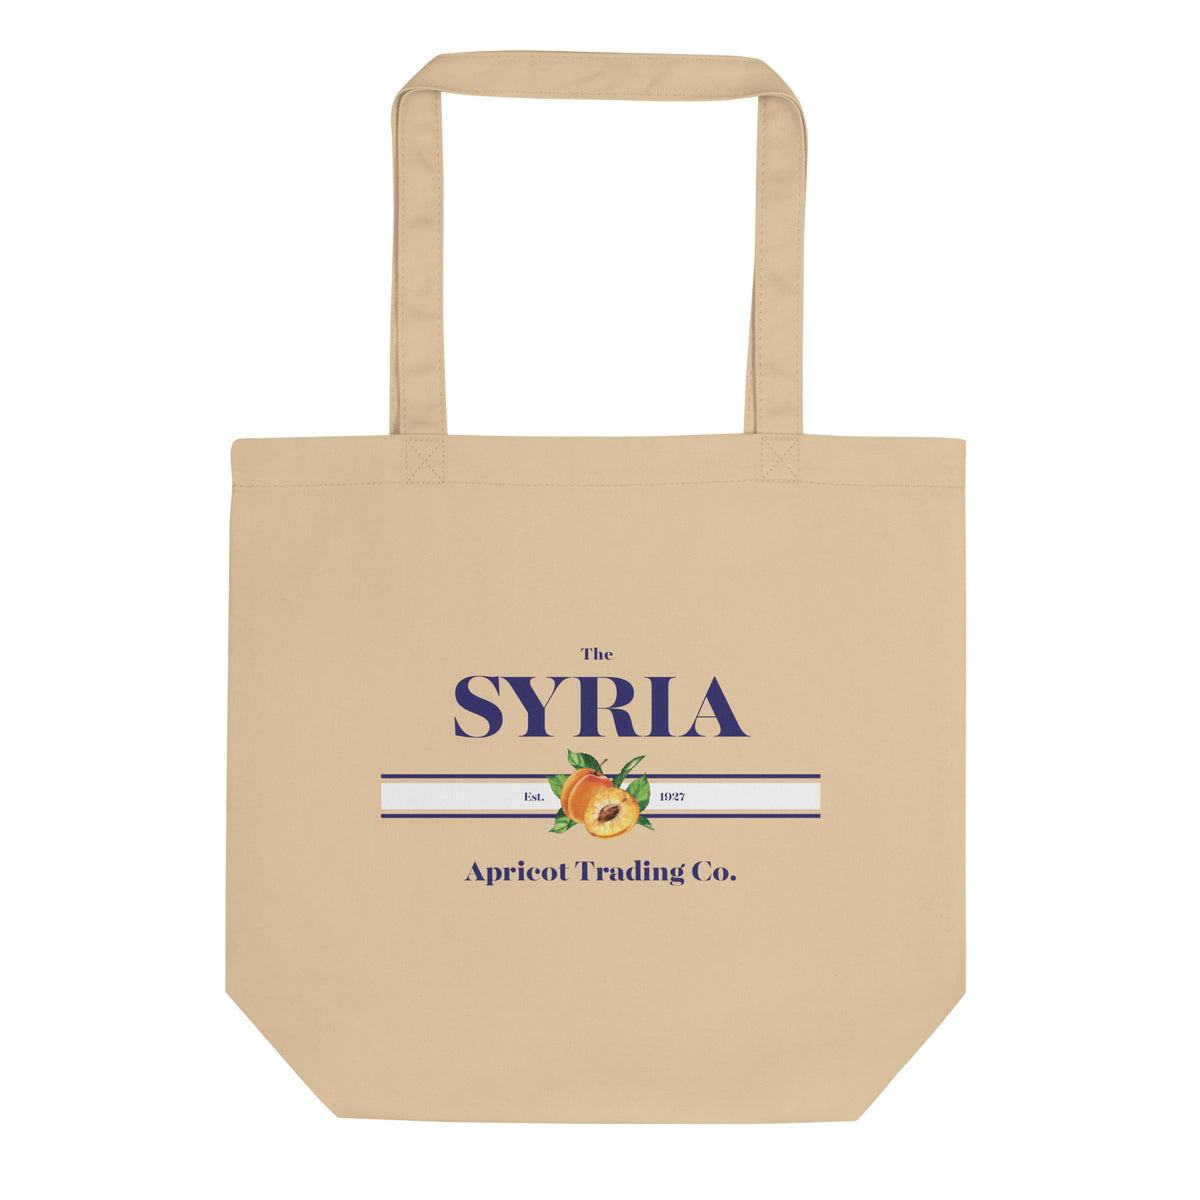 Syria Apricot Trading Co. - Tote